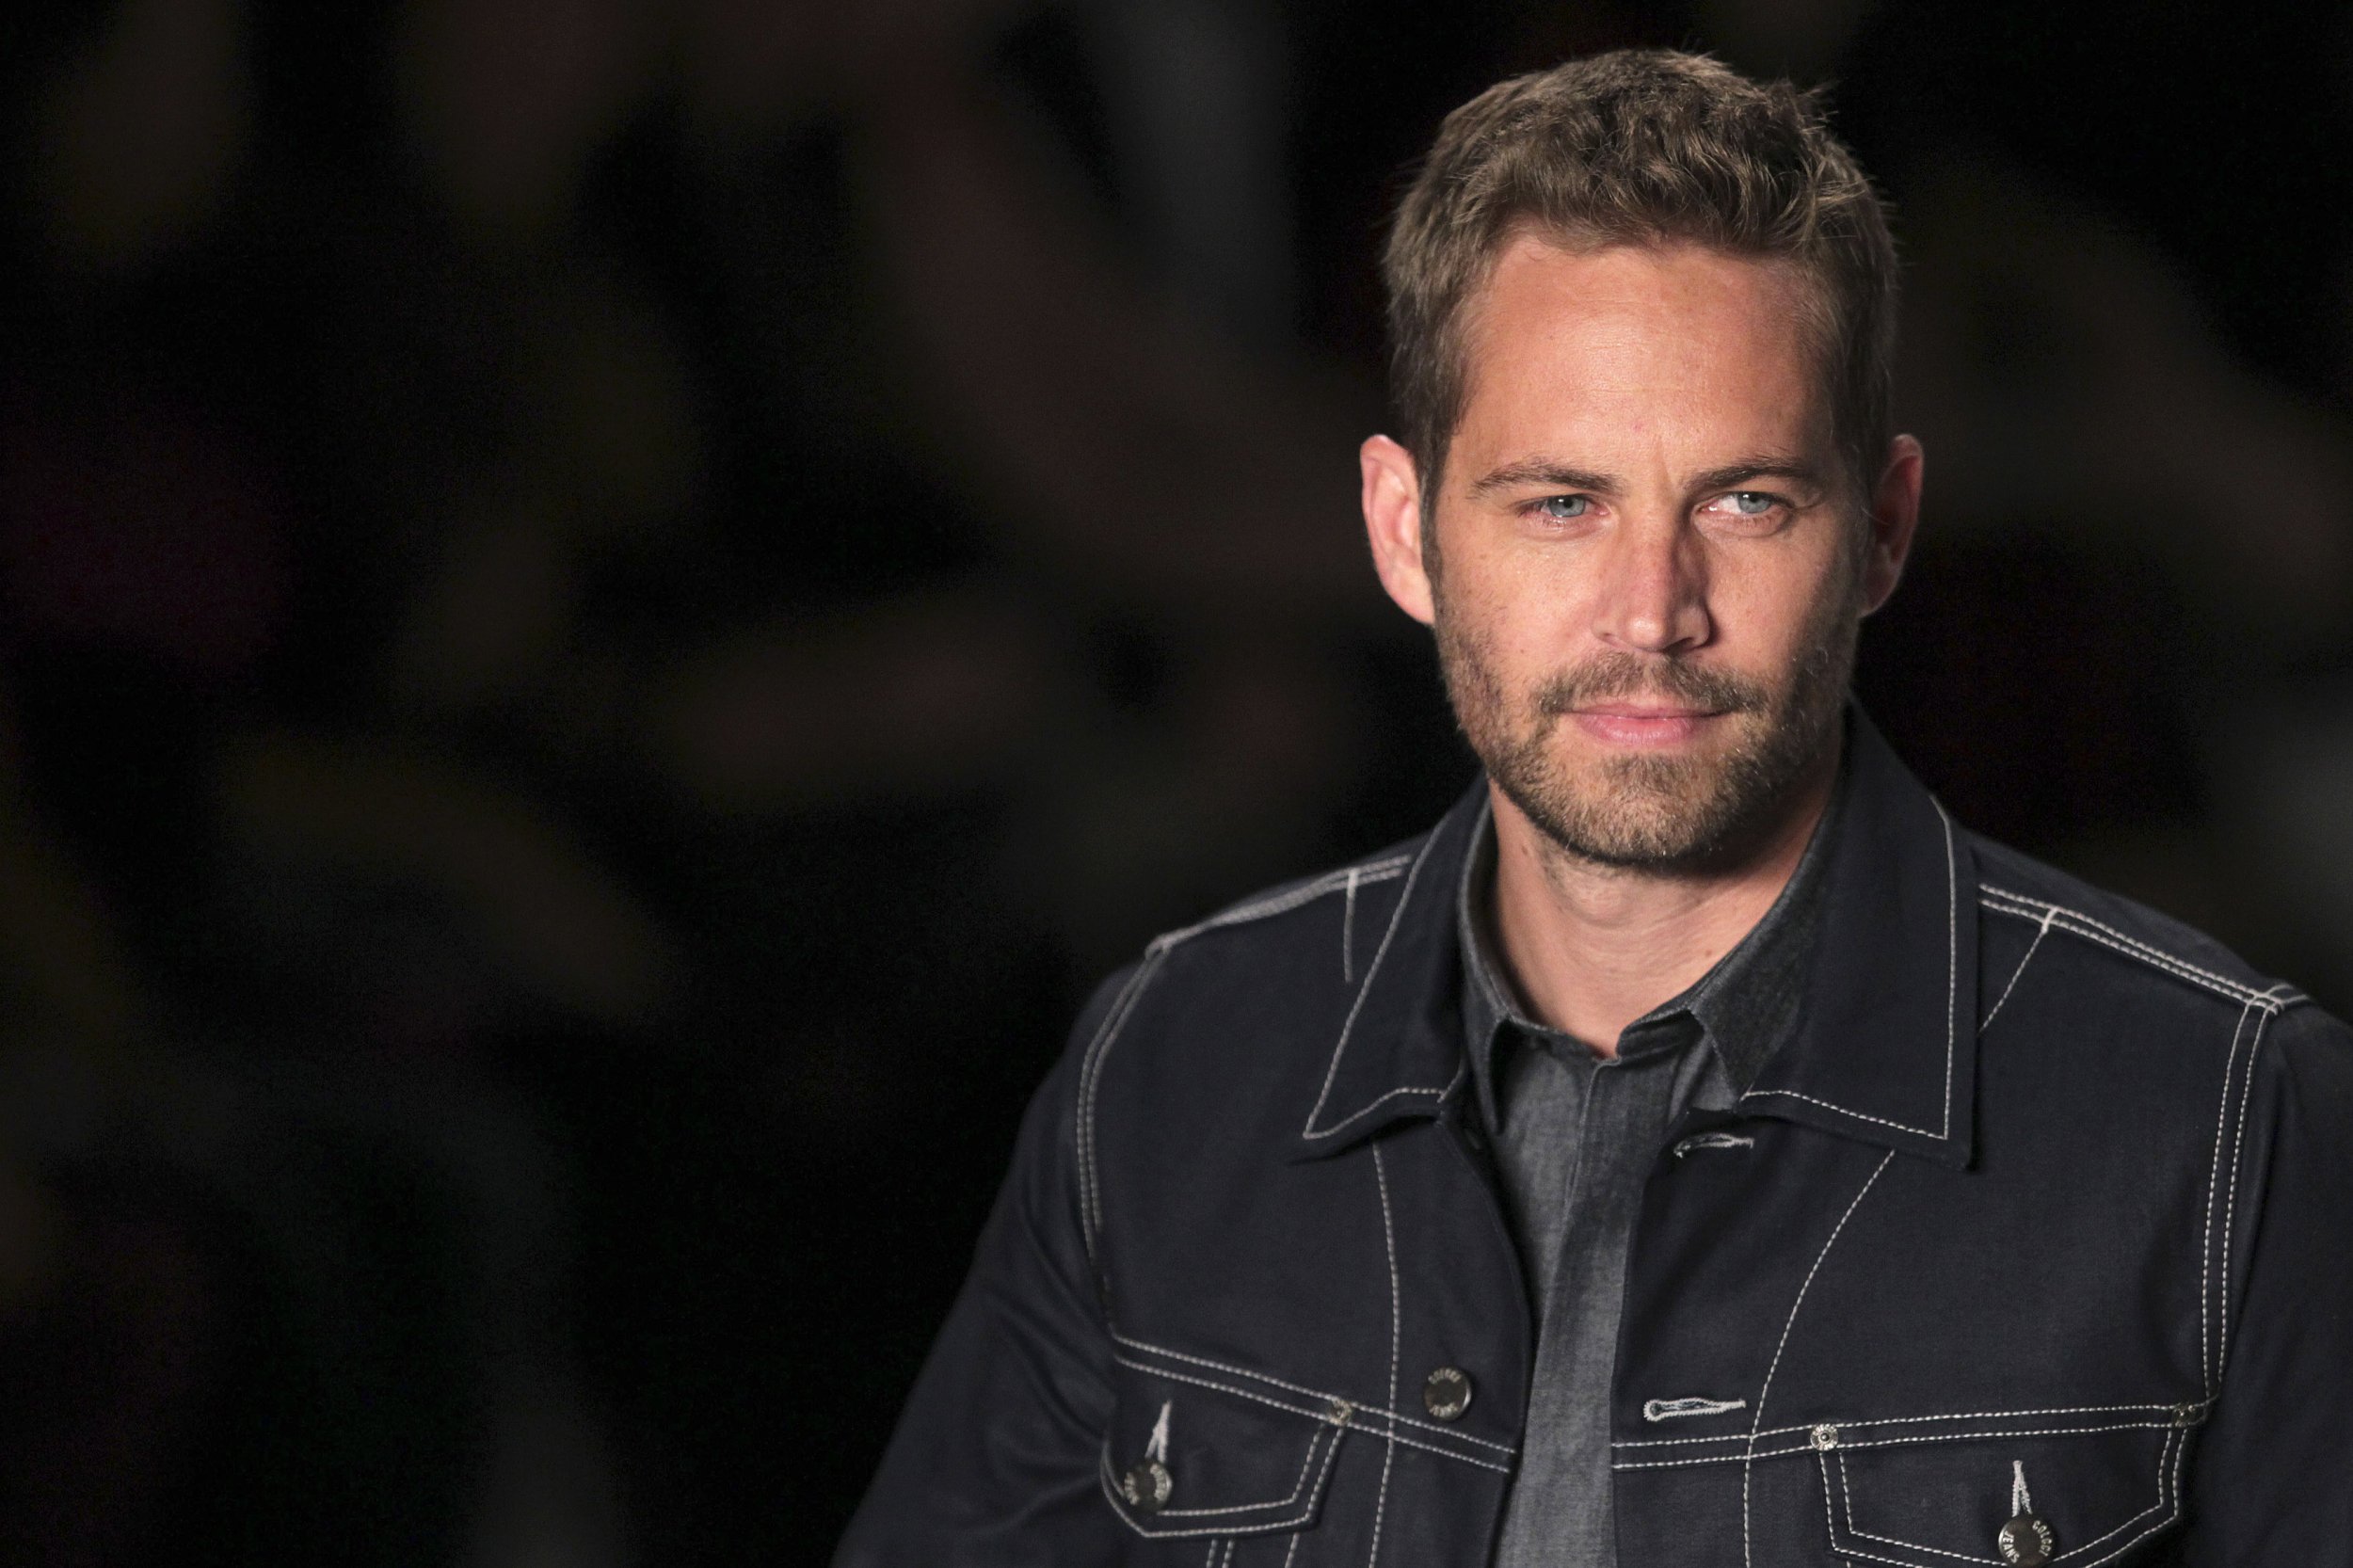 Paul Walkers Brother Cody Walker Looking For Agent After Furious 7 Ibtimes 